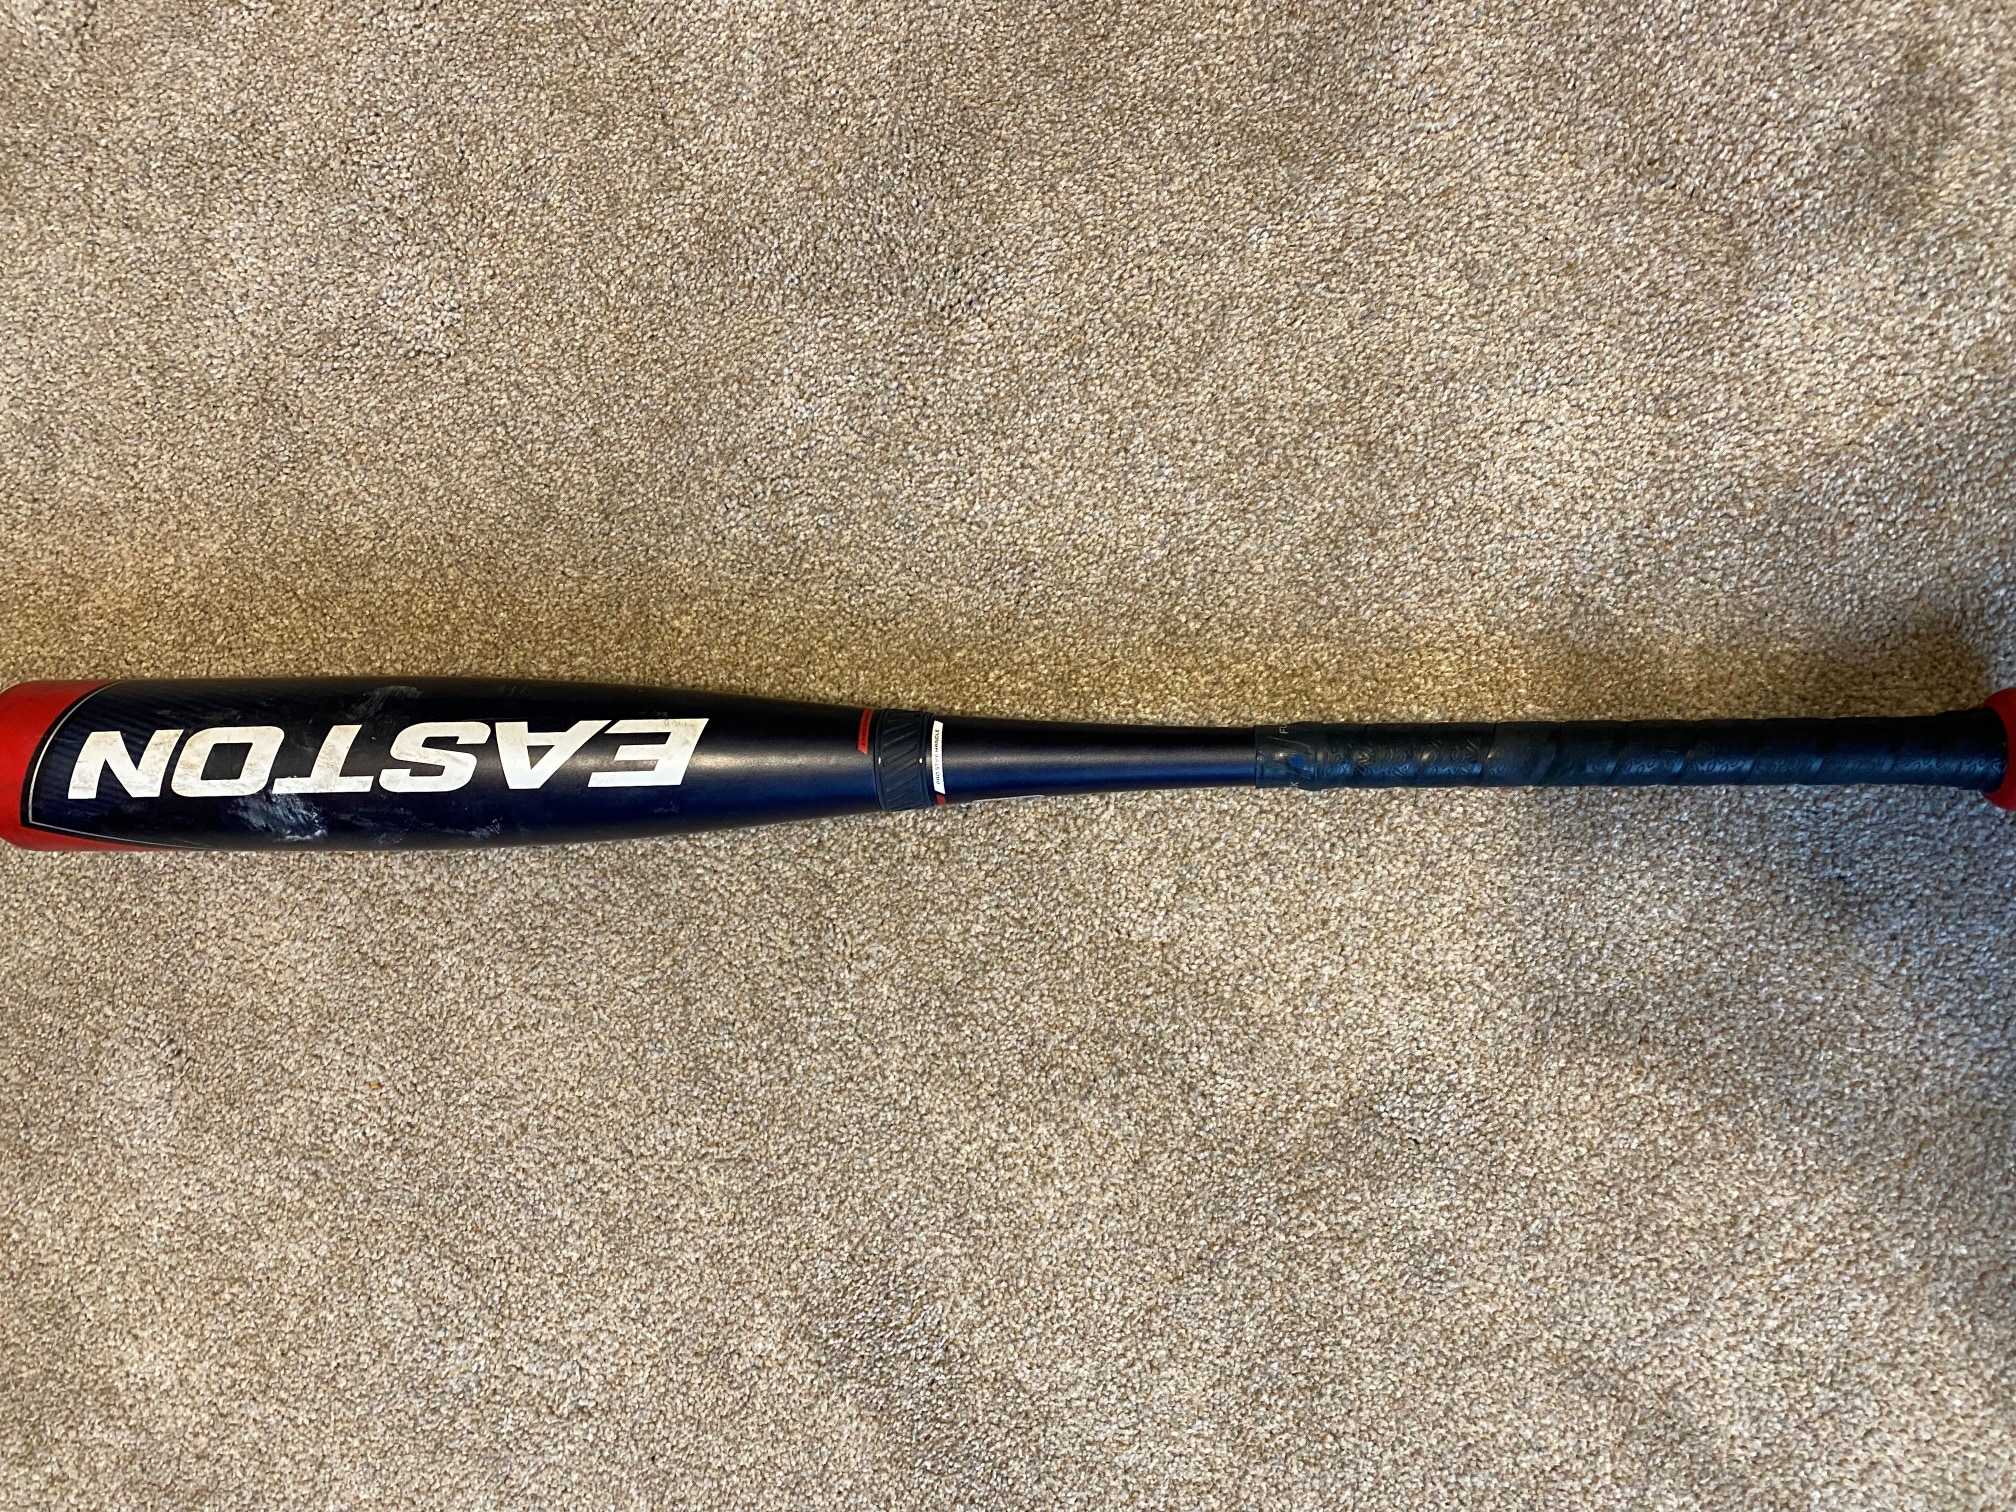 Used USSSA Certified 2021 Easton Composite ADV Hype Bat (-10) 20 oz 30"